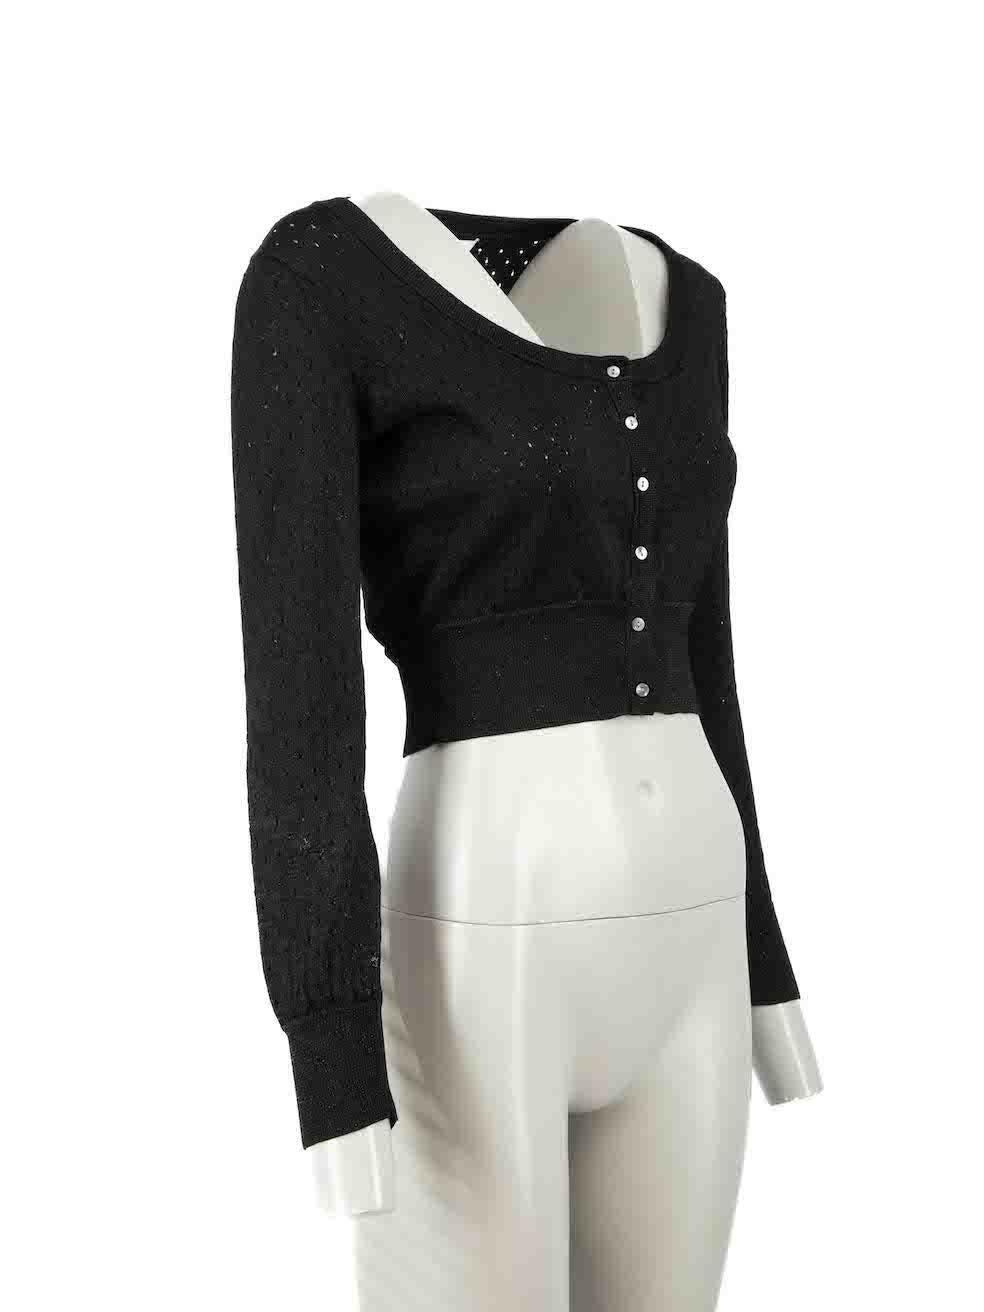 CONDITION is Good. Minor wear to cardigan is evident. Light wear to the knit with small plucks to the weave on this used Maje designer resale item.
 
Details
Black
Viscose
Cropped cardigan
Knitted and stretchy
Metallic accent
Dotted cut out holes